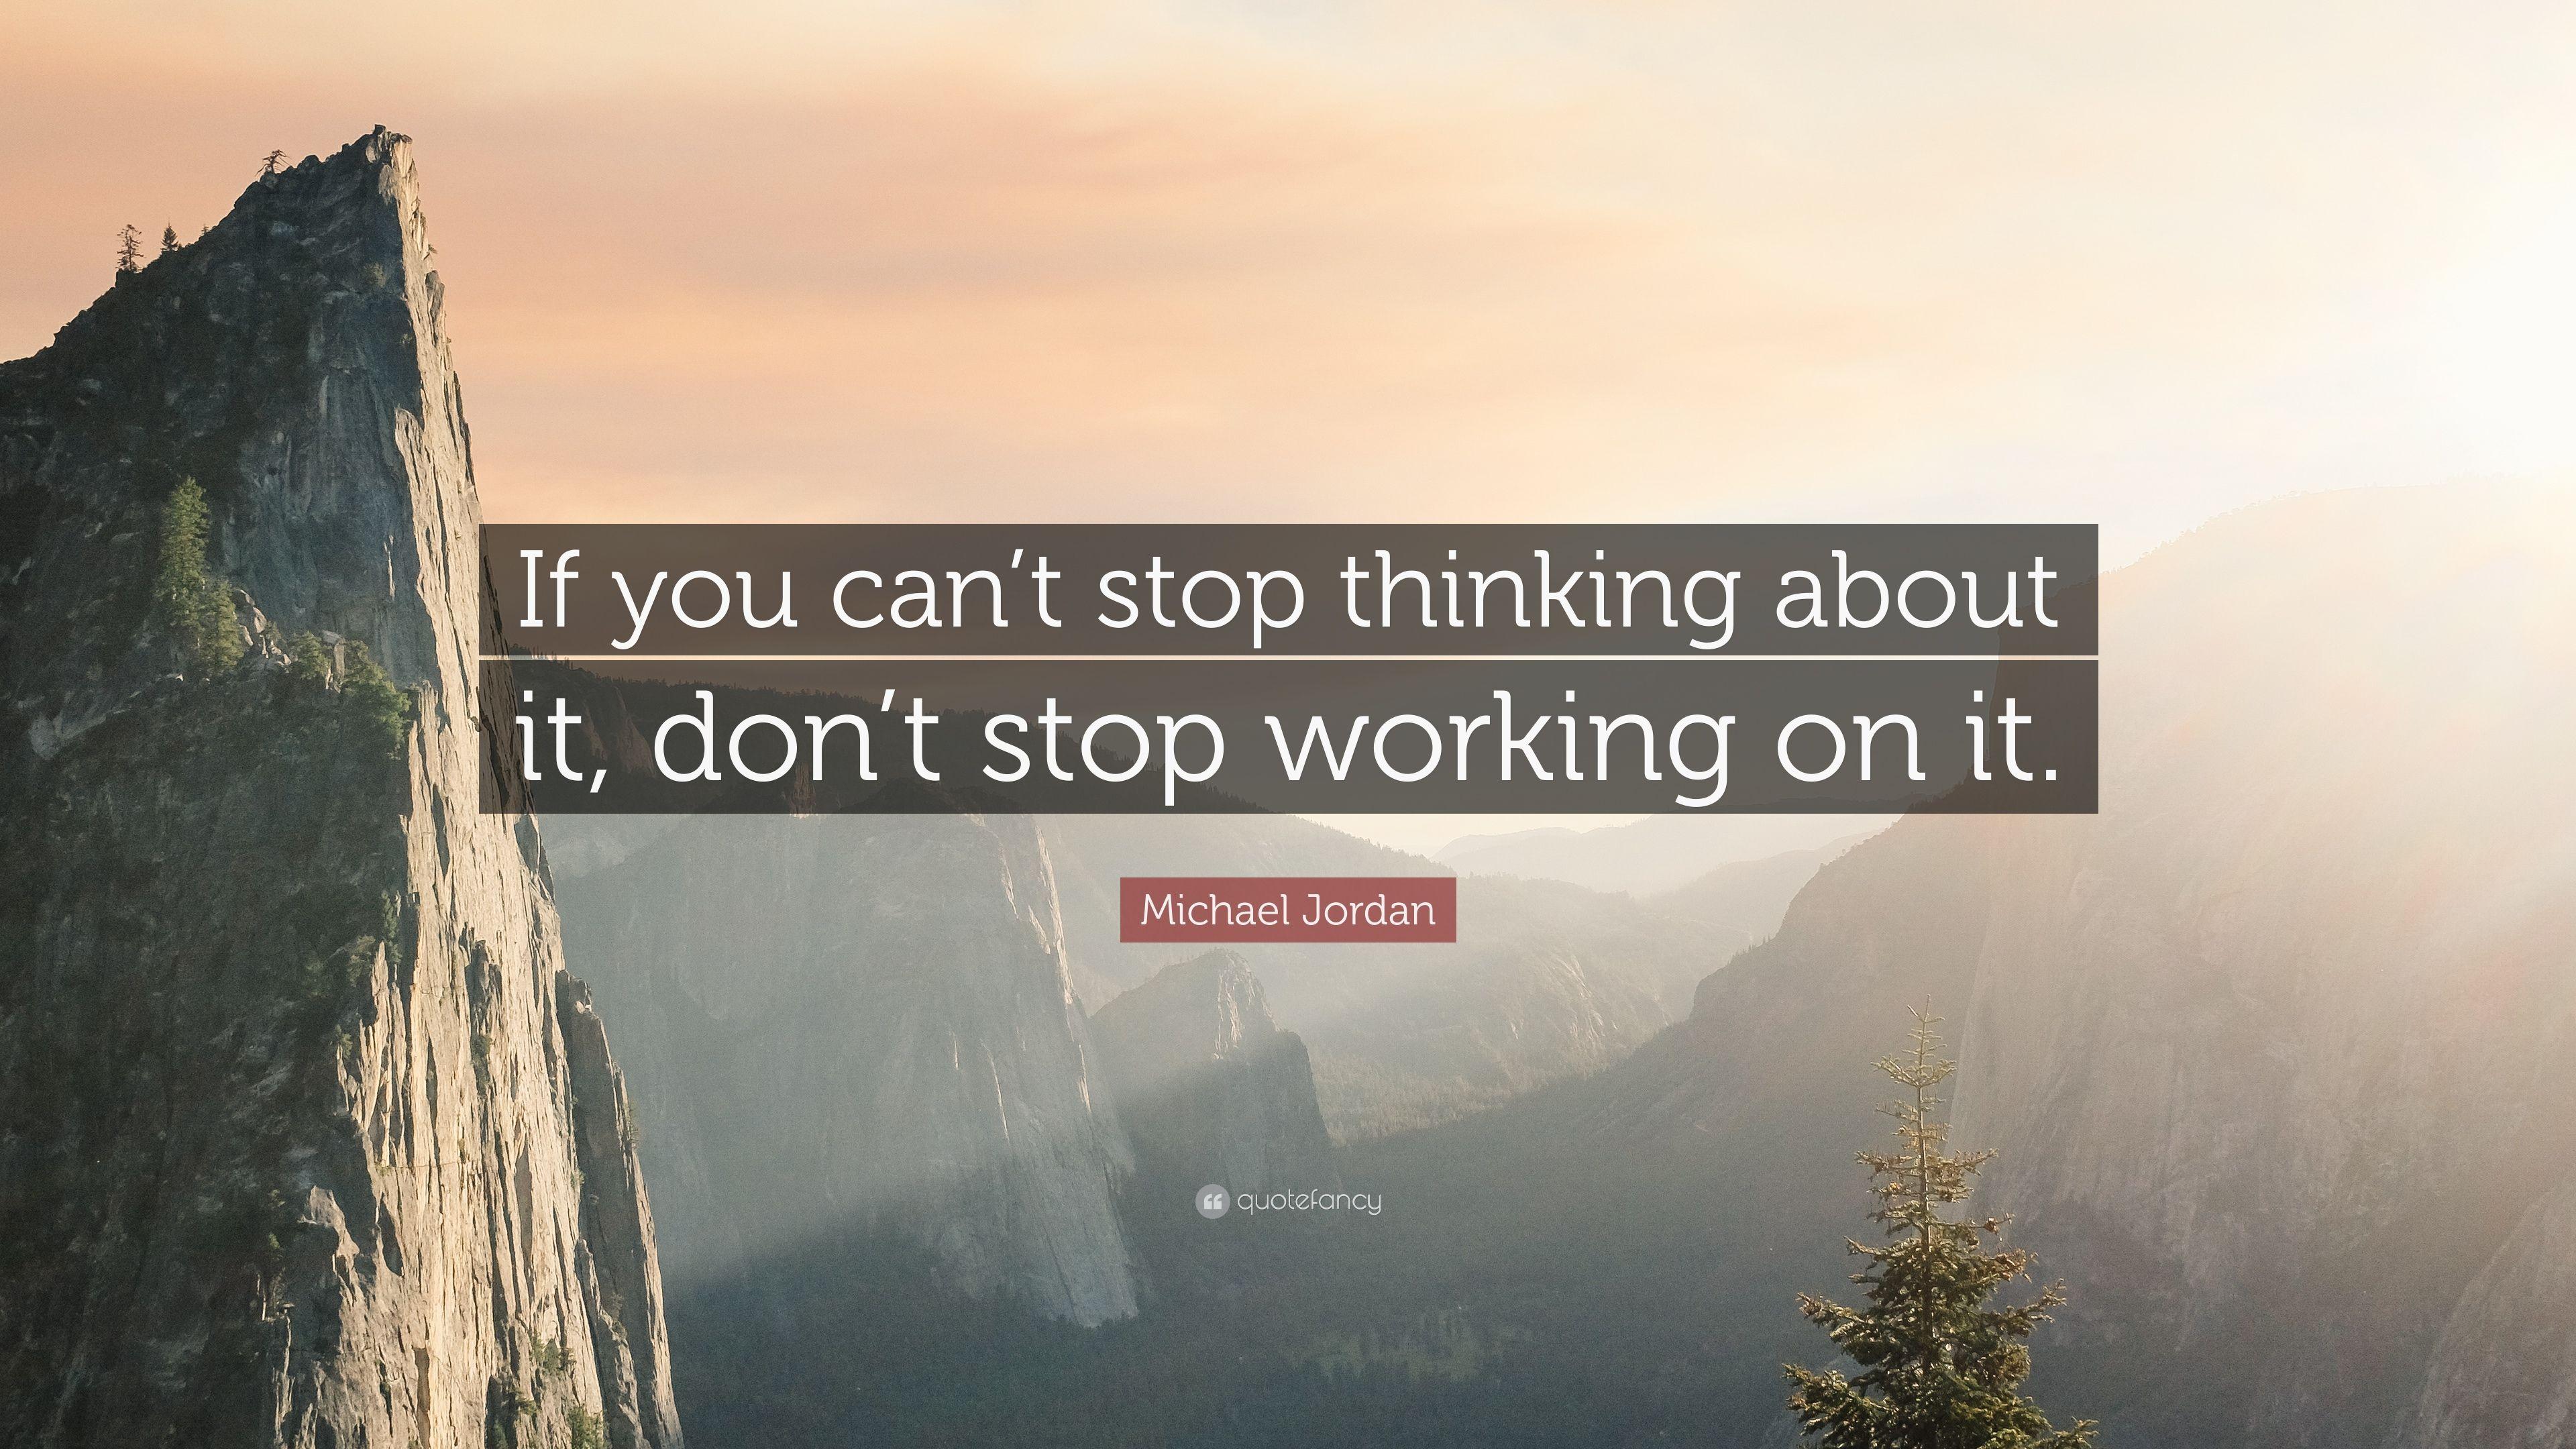 Michael Jordan Quote: “If you can't stop thinking about it, don't